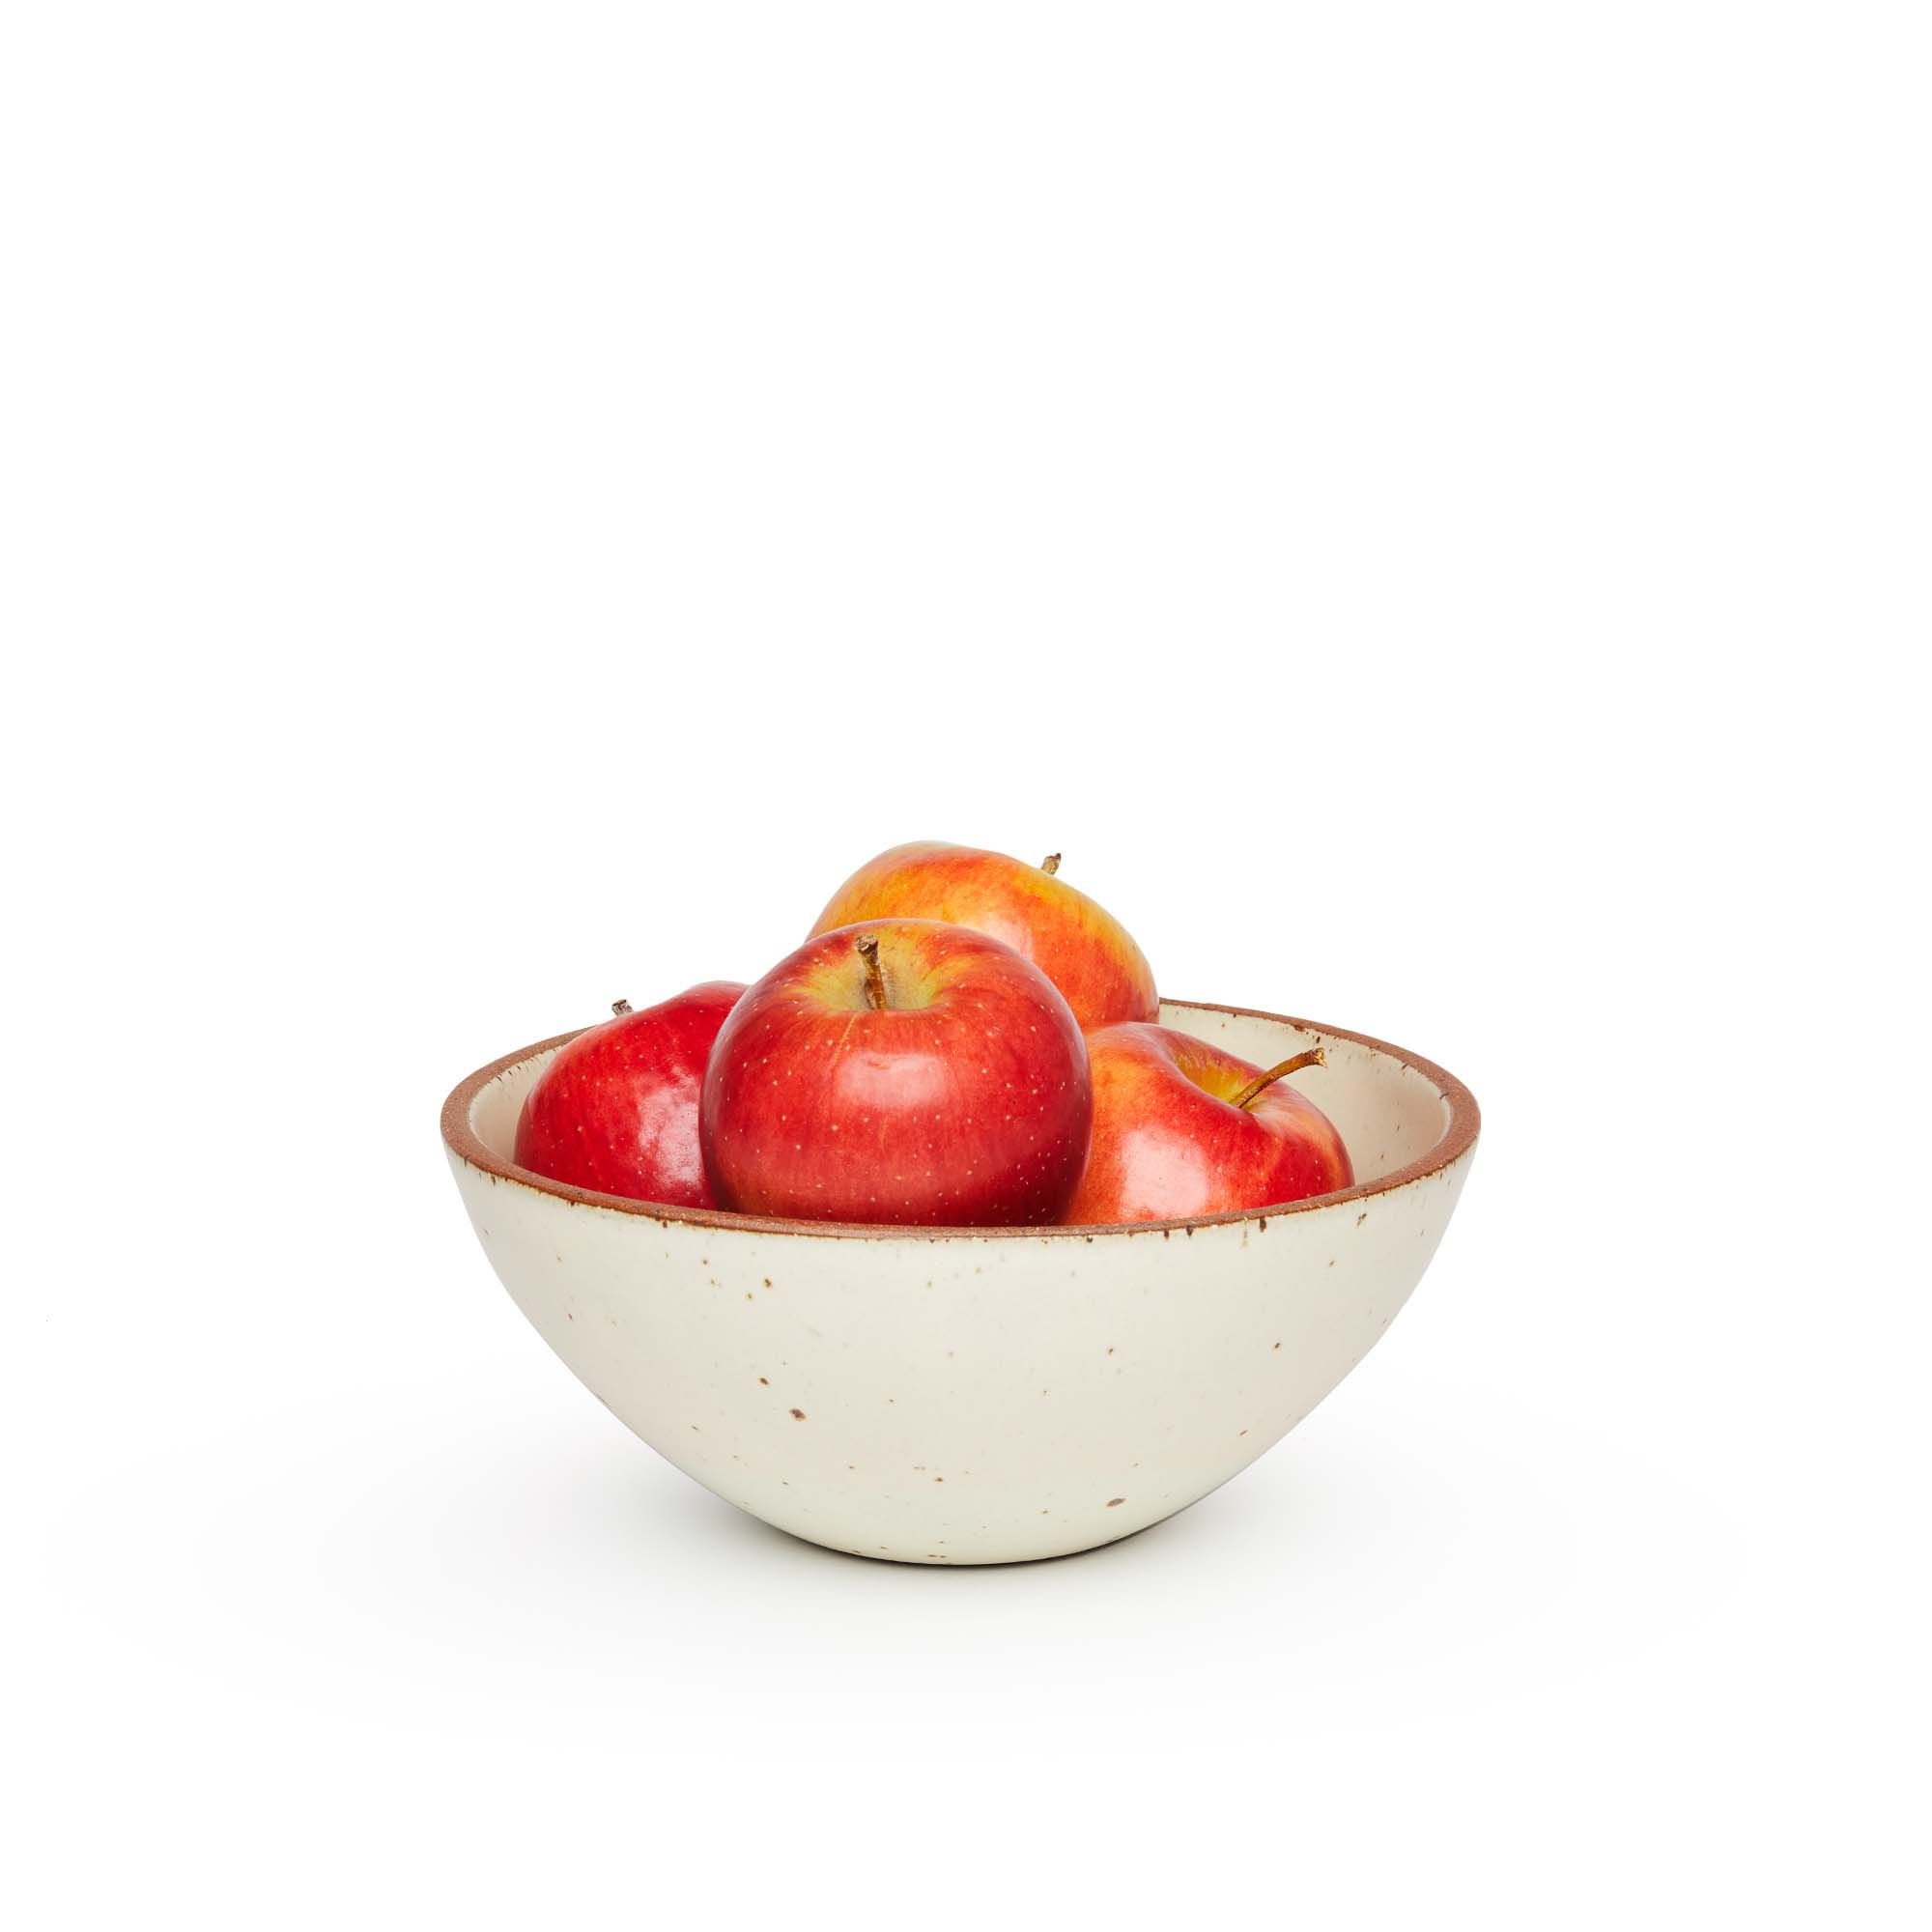 A medium rounded ceramic bowl in a warm, tan-toned, off-white color featuring iron speckles and an unglazed rim, filled with apples